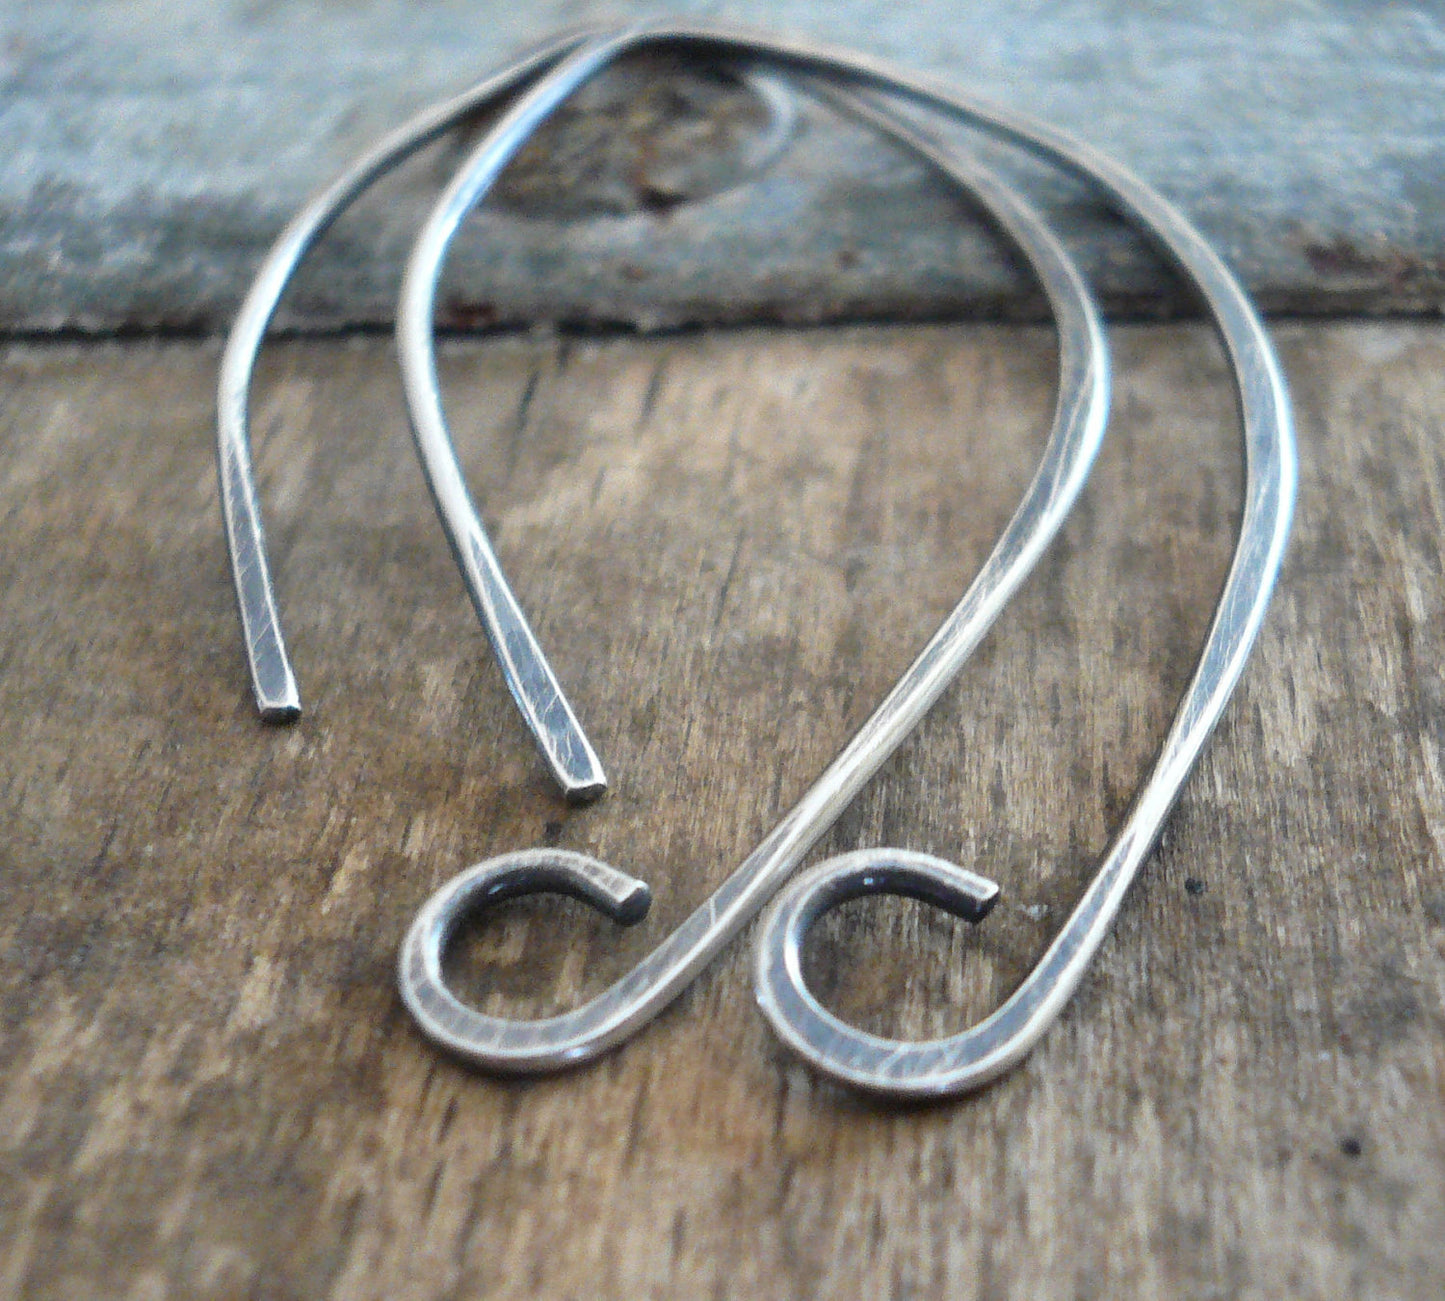 12 Pairs of my Hint Sterling Silver Earwires - Handmade. Handforged. Oxidized and polished